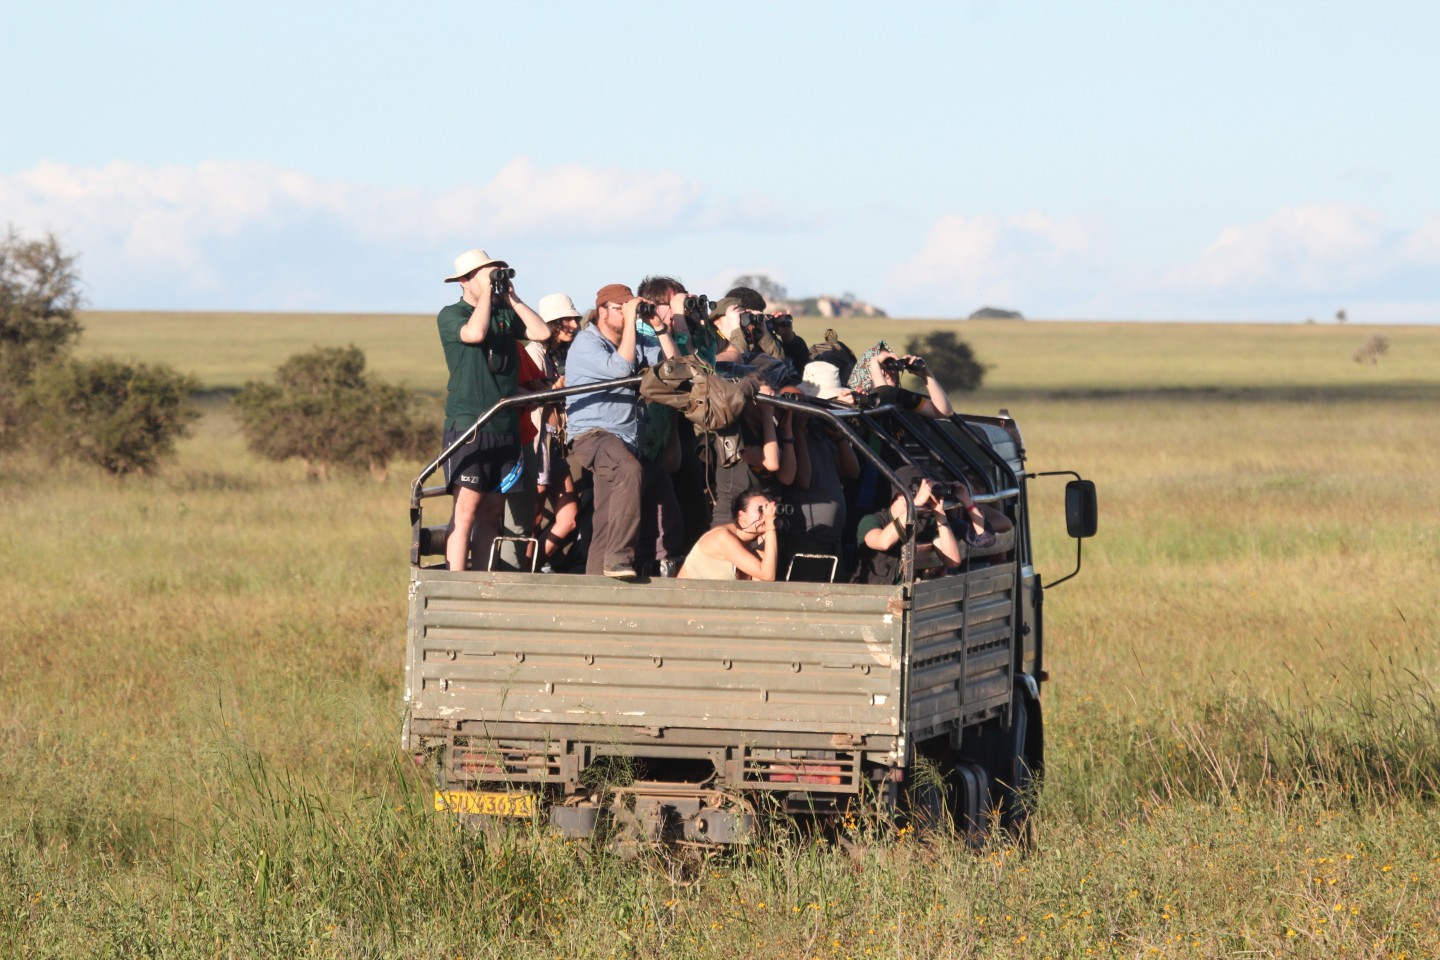 A group of students on a field trip in the Serengeti National Park, stood on a truck using binoculars. 